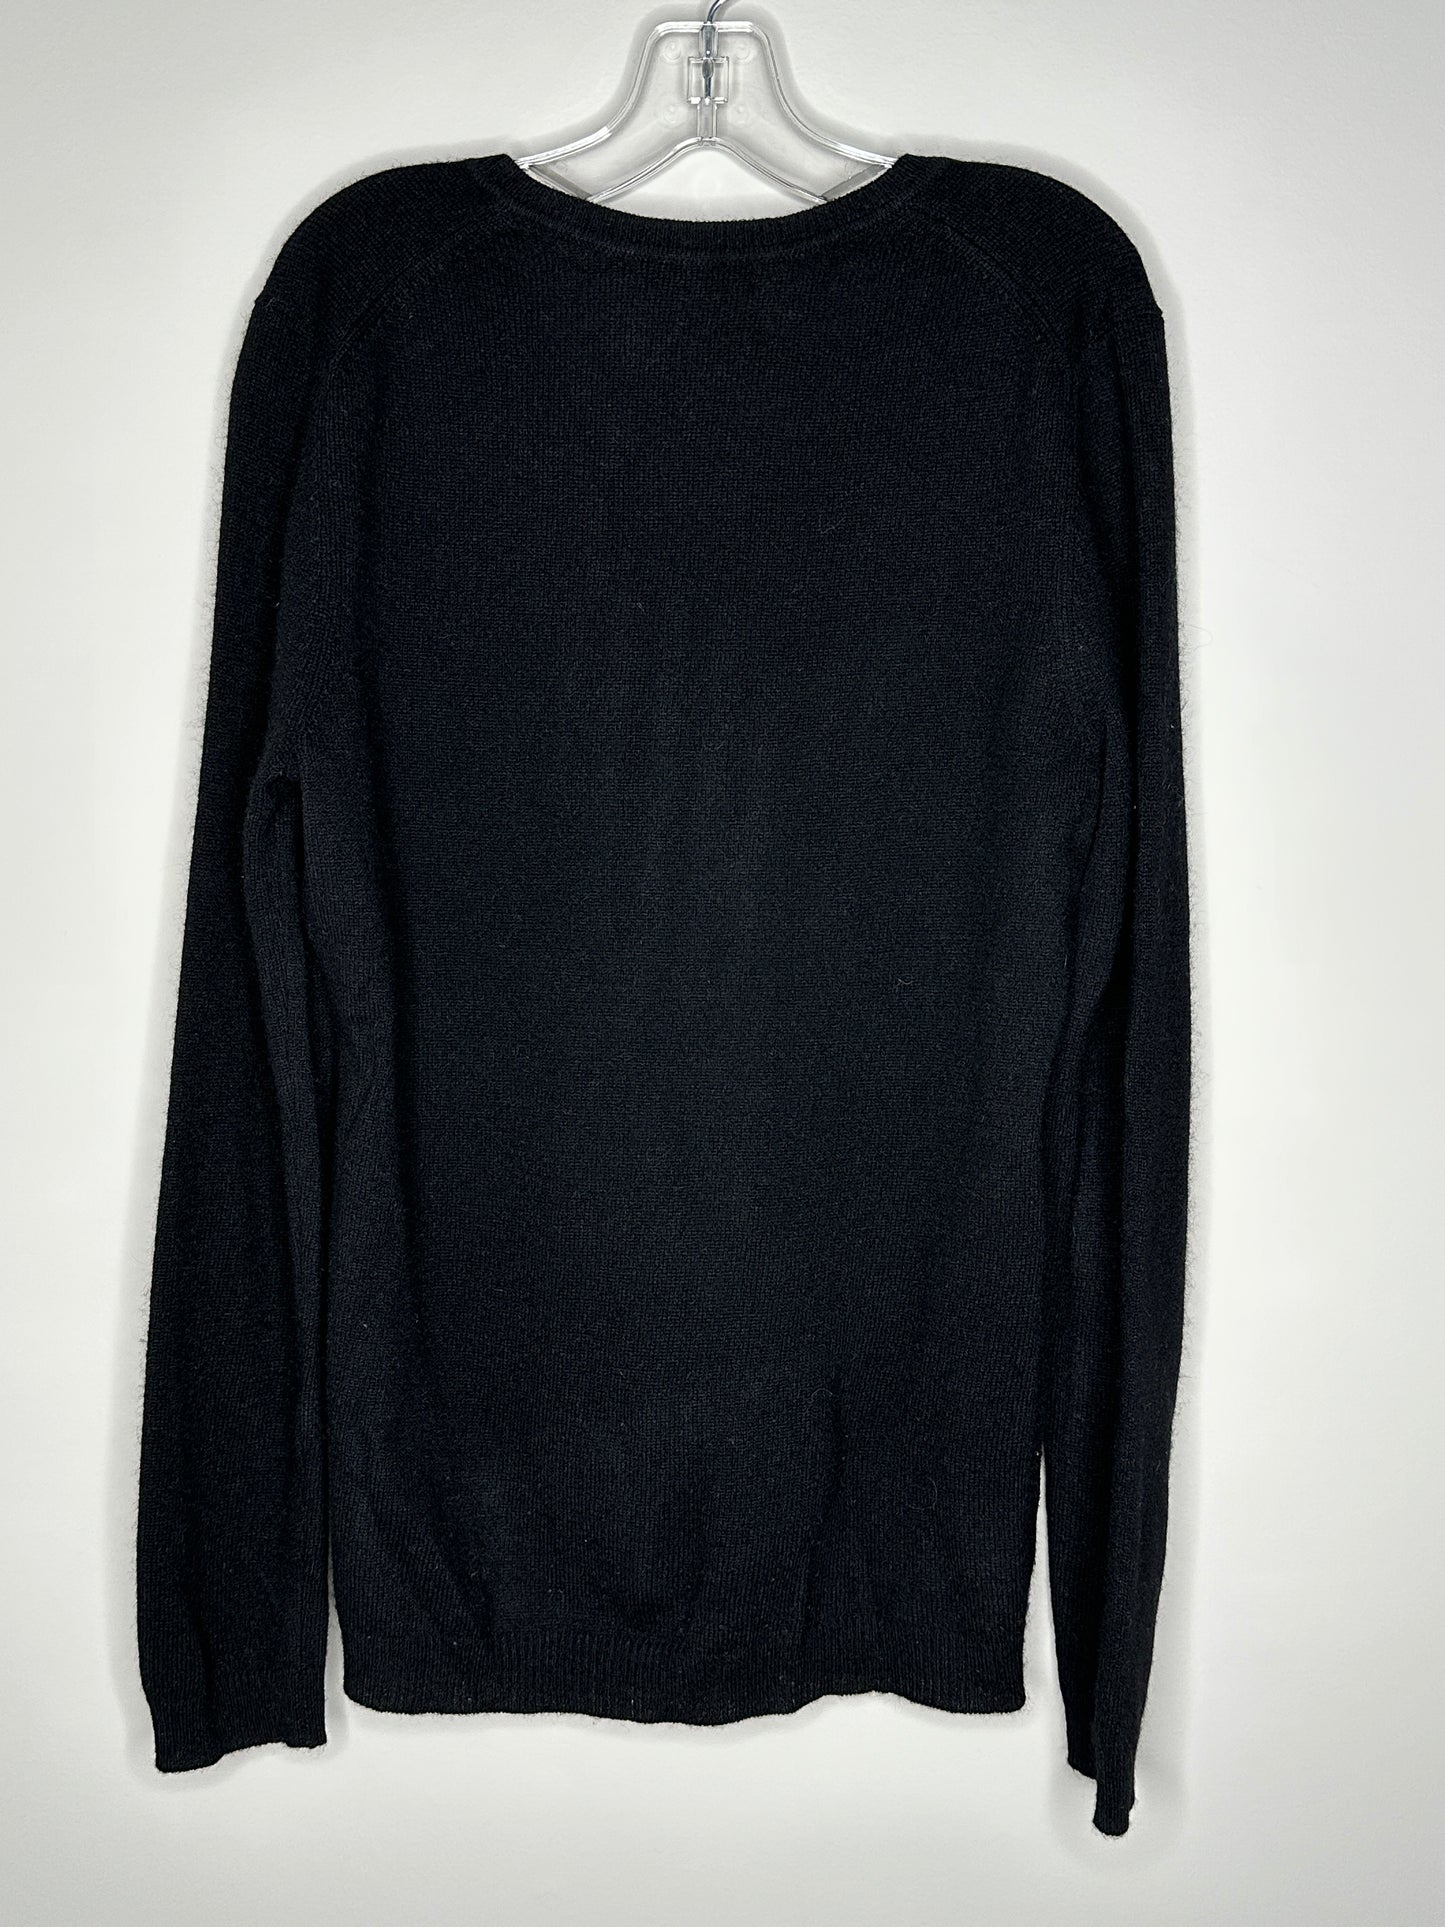 Charter Club Size S Black V-Neck Pullover Cashmere Sweater